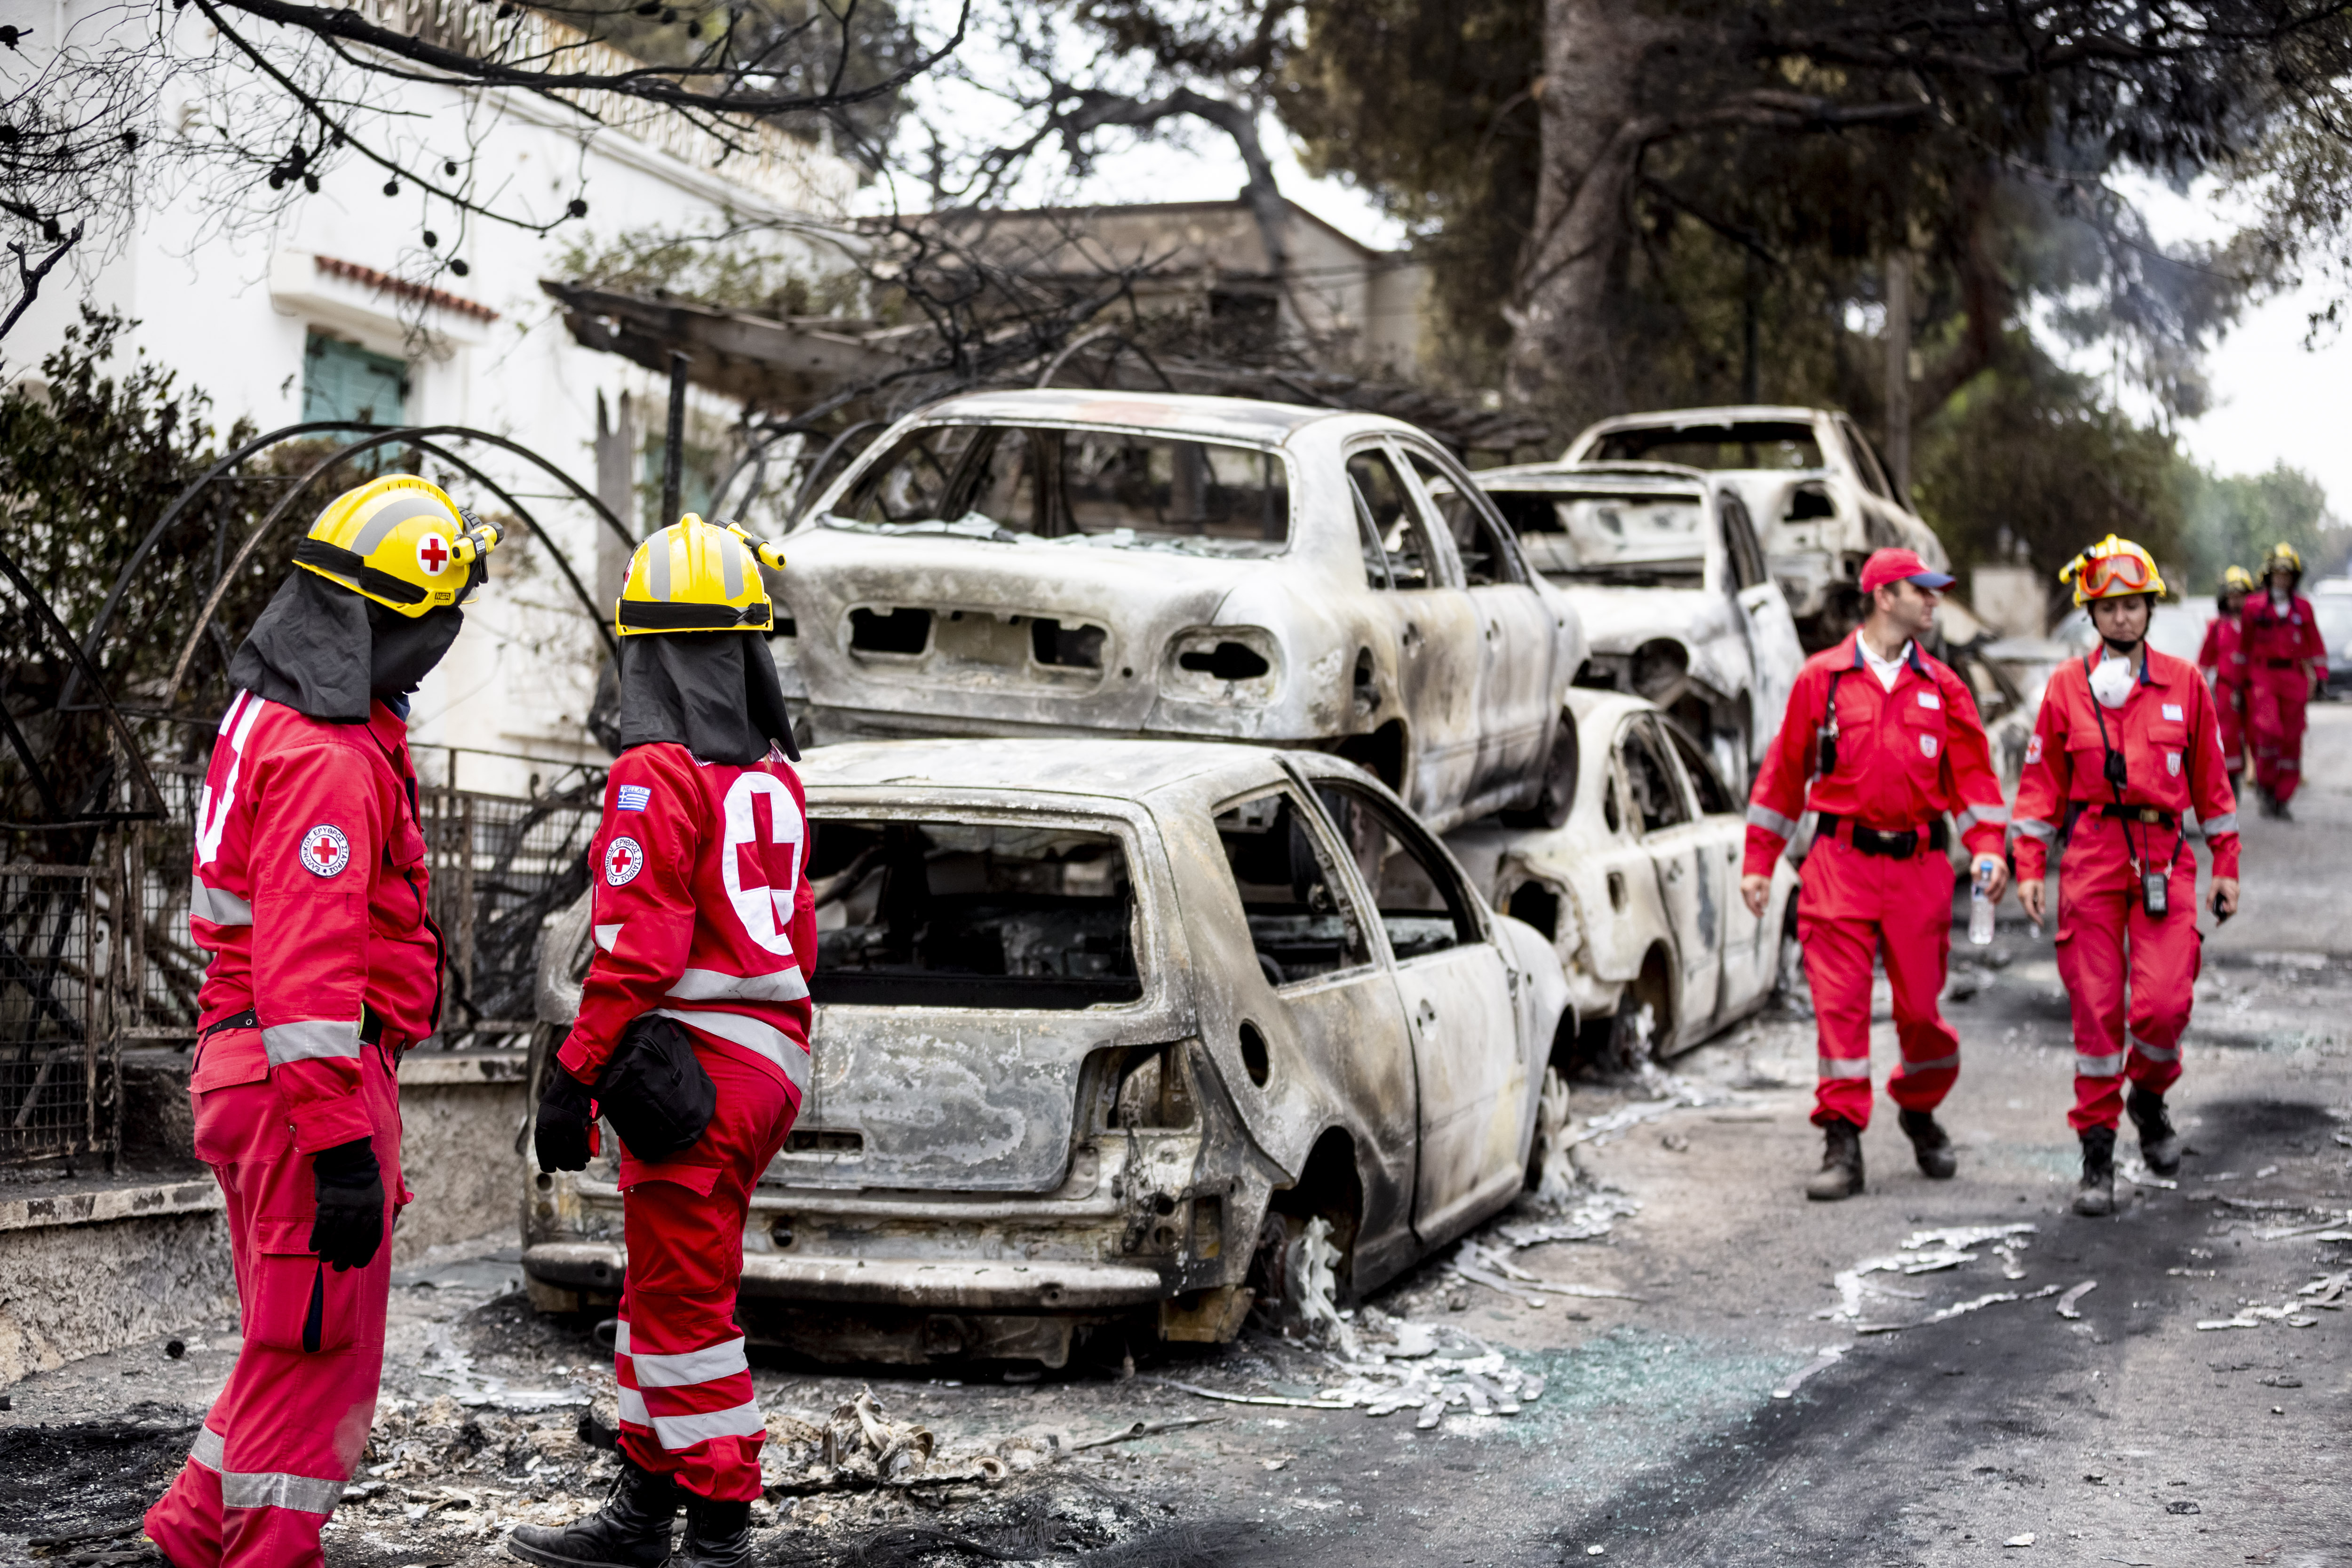 Greek Catholic leaders urge country to learn lessons from wildfires